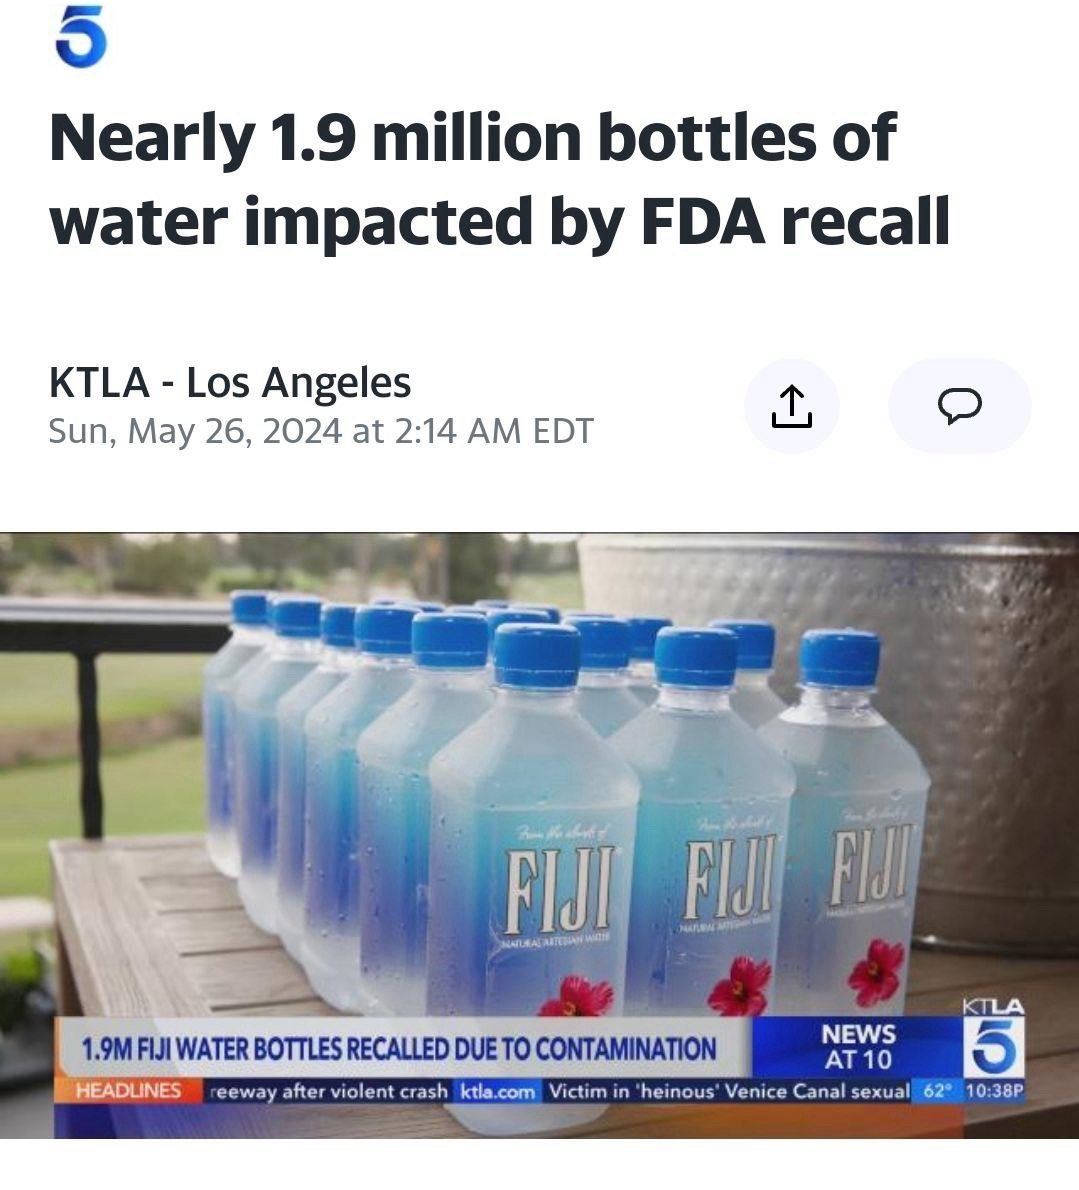 ALL bottled water is BAD!!!